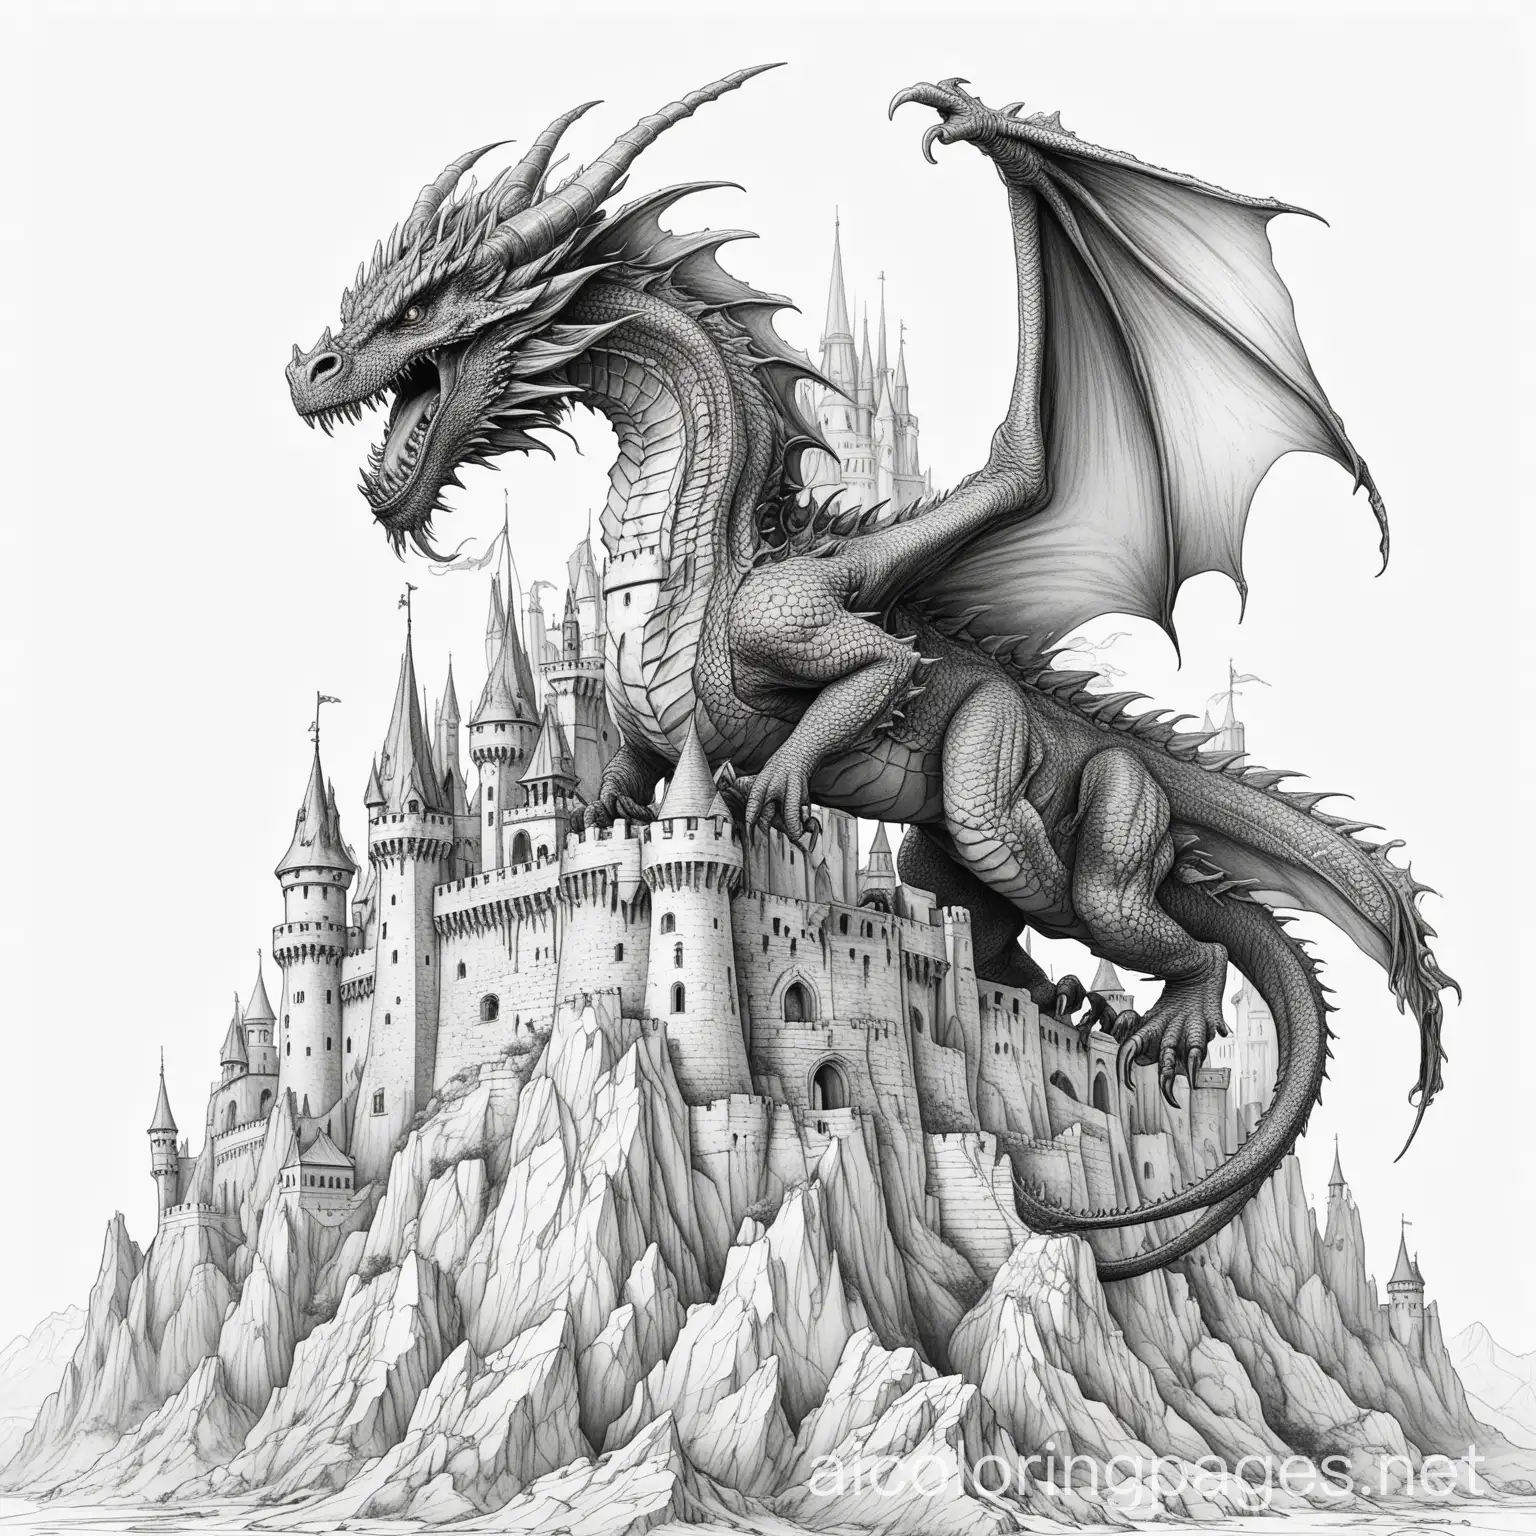 A fierce dragon with a castle., Coloring Page, black and white, line art, white background, Simplicity, Ample White Space. The background of the coloring page is plain white to make it easy for young children to color within the lines. The outlines of all the subjects are easy to distinguish, making it simple for kids to color without too much difficulty